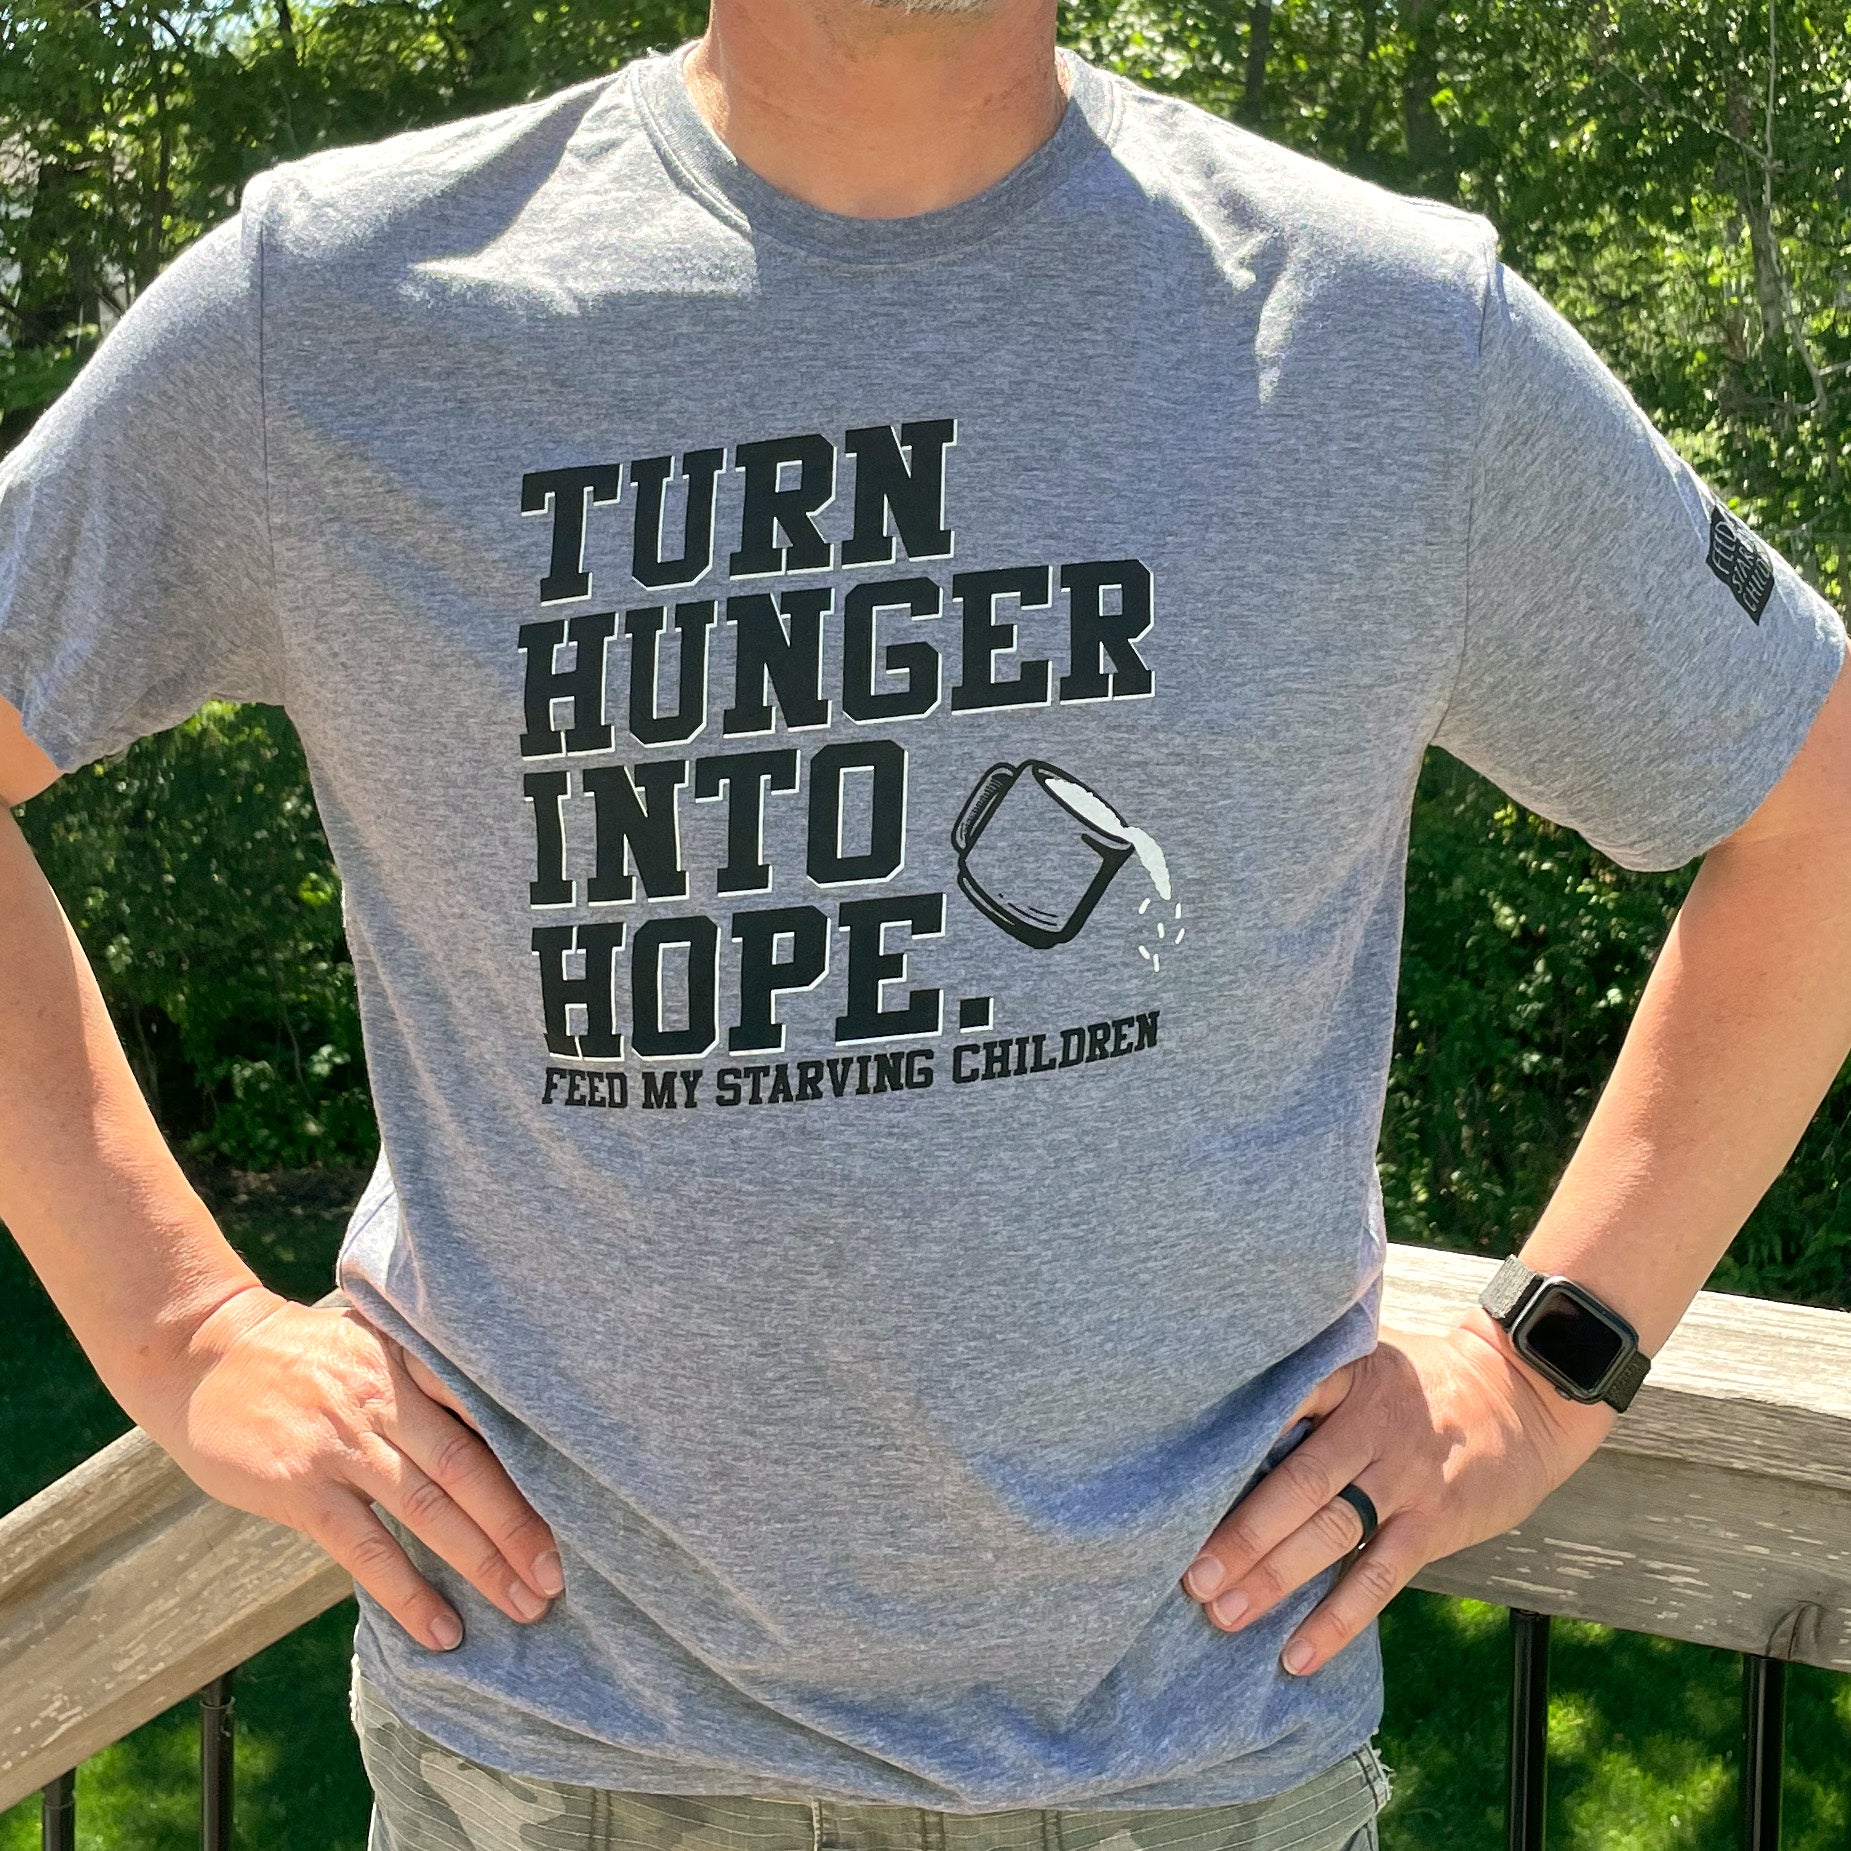 Turn Hunger Into Hope T-Shirt